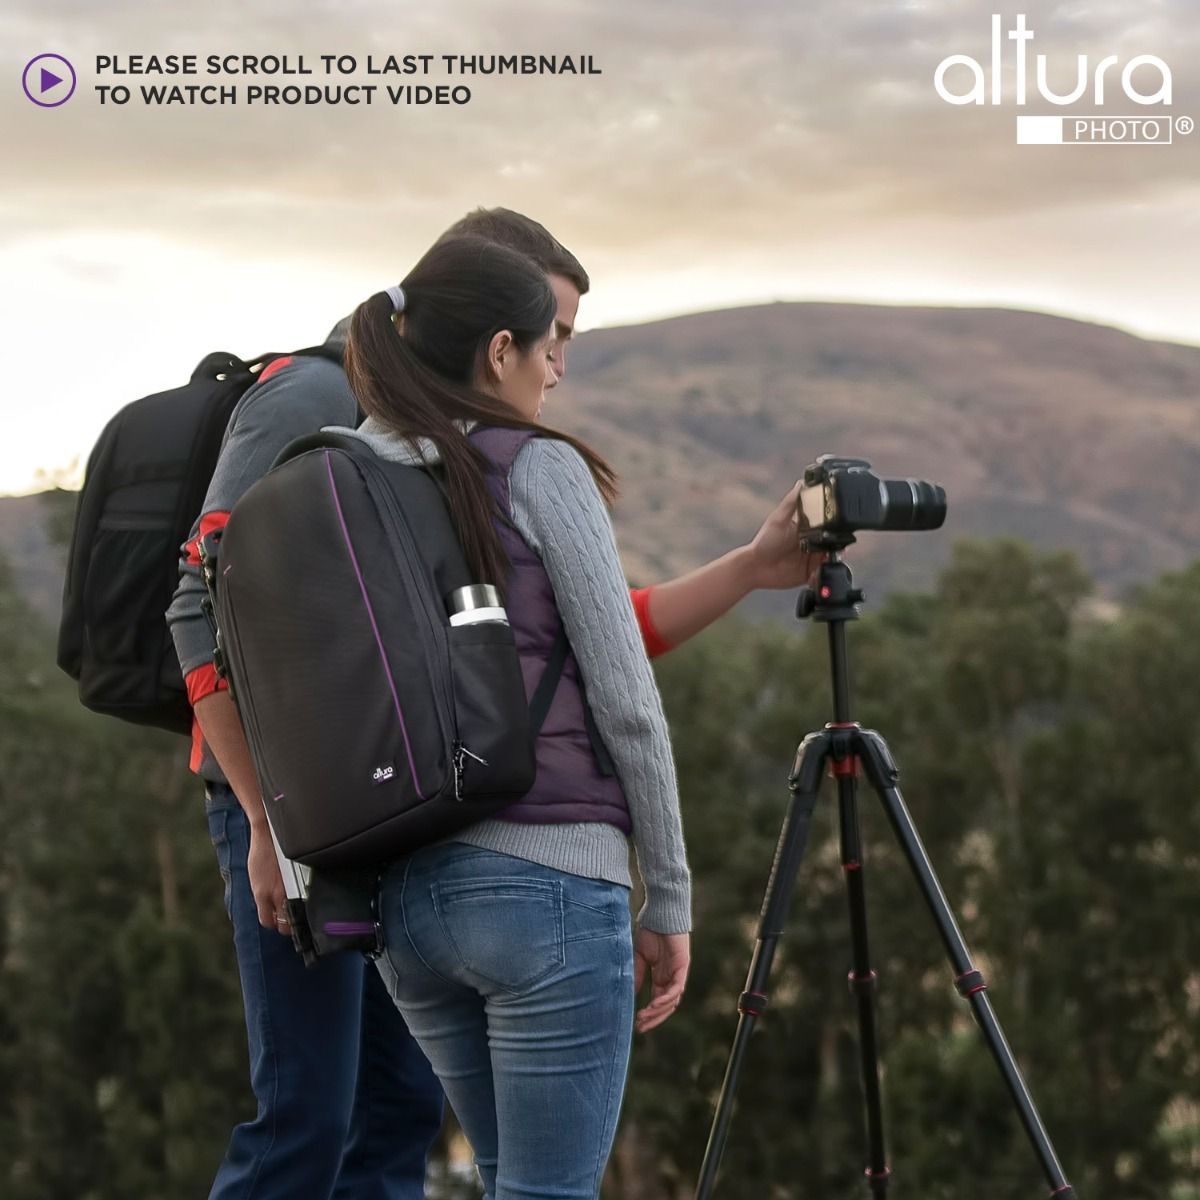 Camera Backpack with Laptop Case for Canon Nikon Sony Mirrorless and DSLR  Camera, Flash Light and other Photography Accessories - Large Capacity Black  Bag with Tripod Holder by Altura Photo